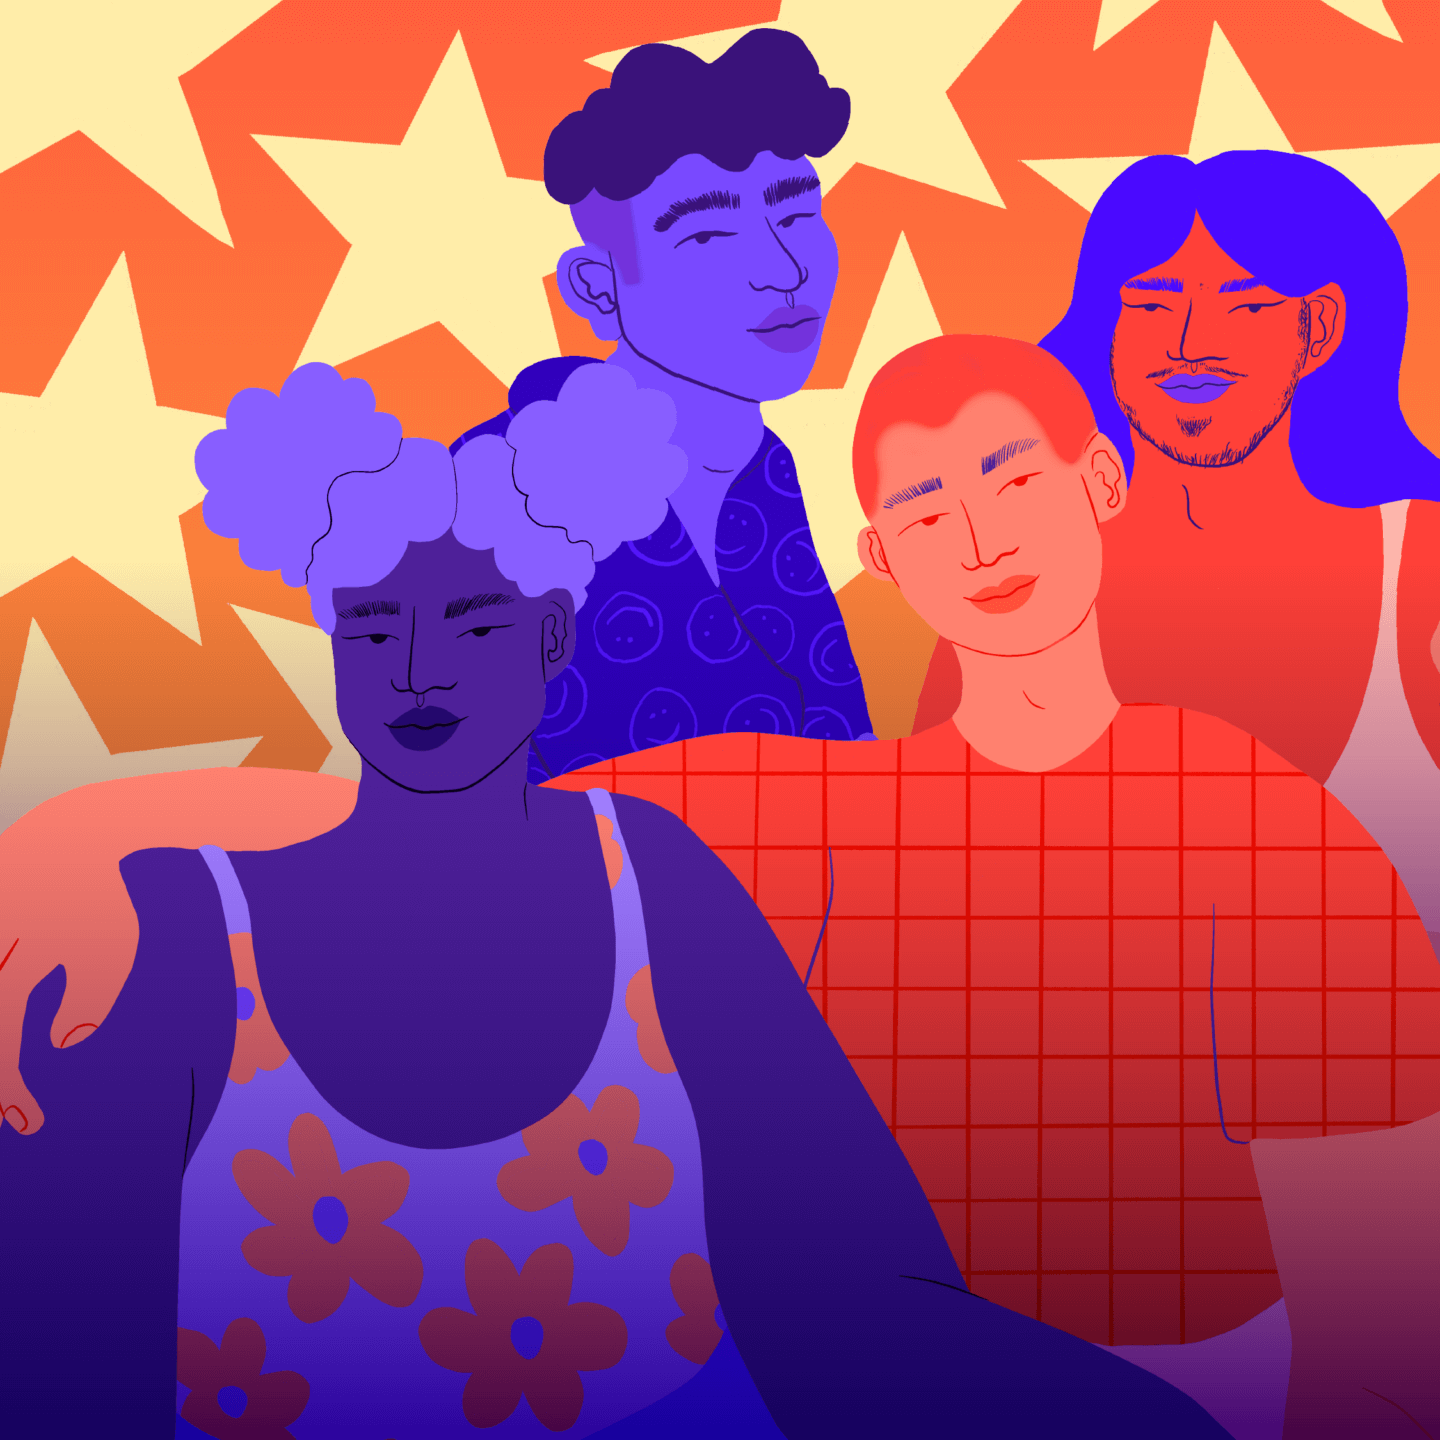 Illustration of 4 people in front of a background of stars